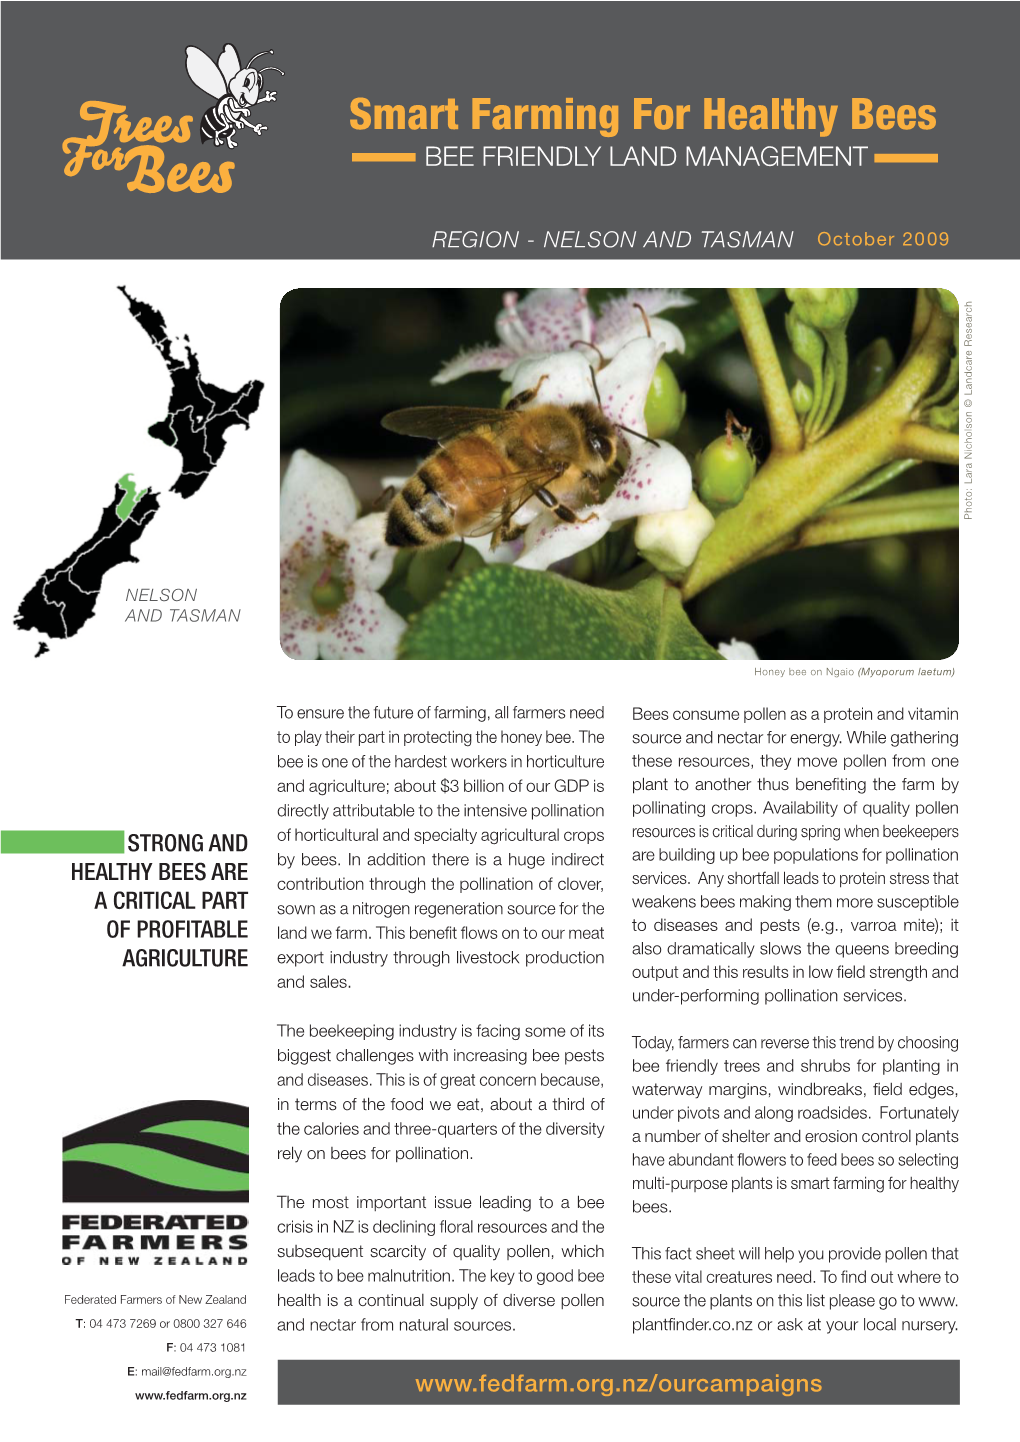 Nelson & Tasman Planting Guide. Farmers Trees for Bees